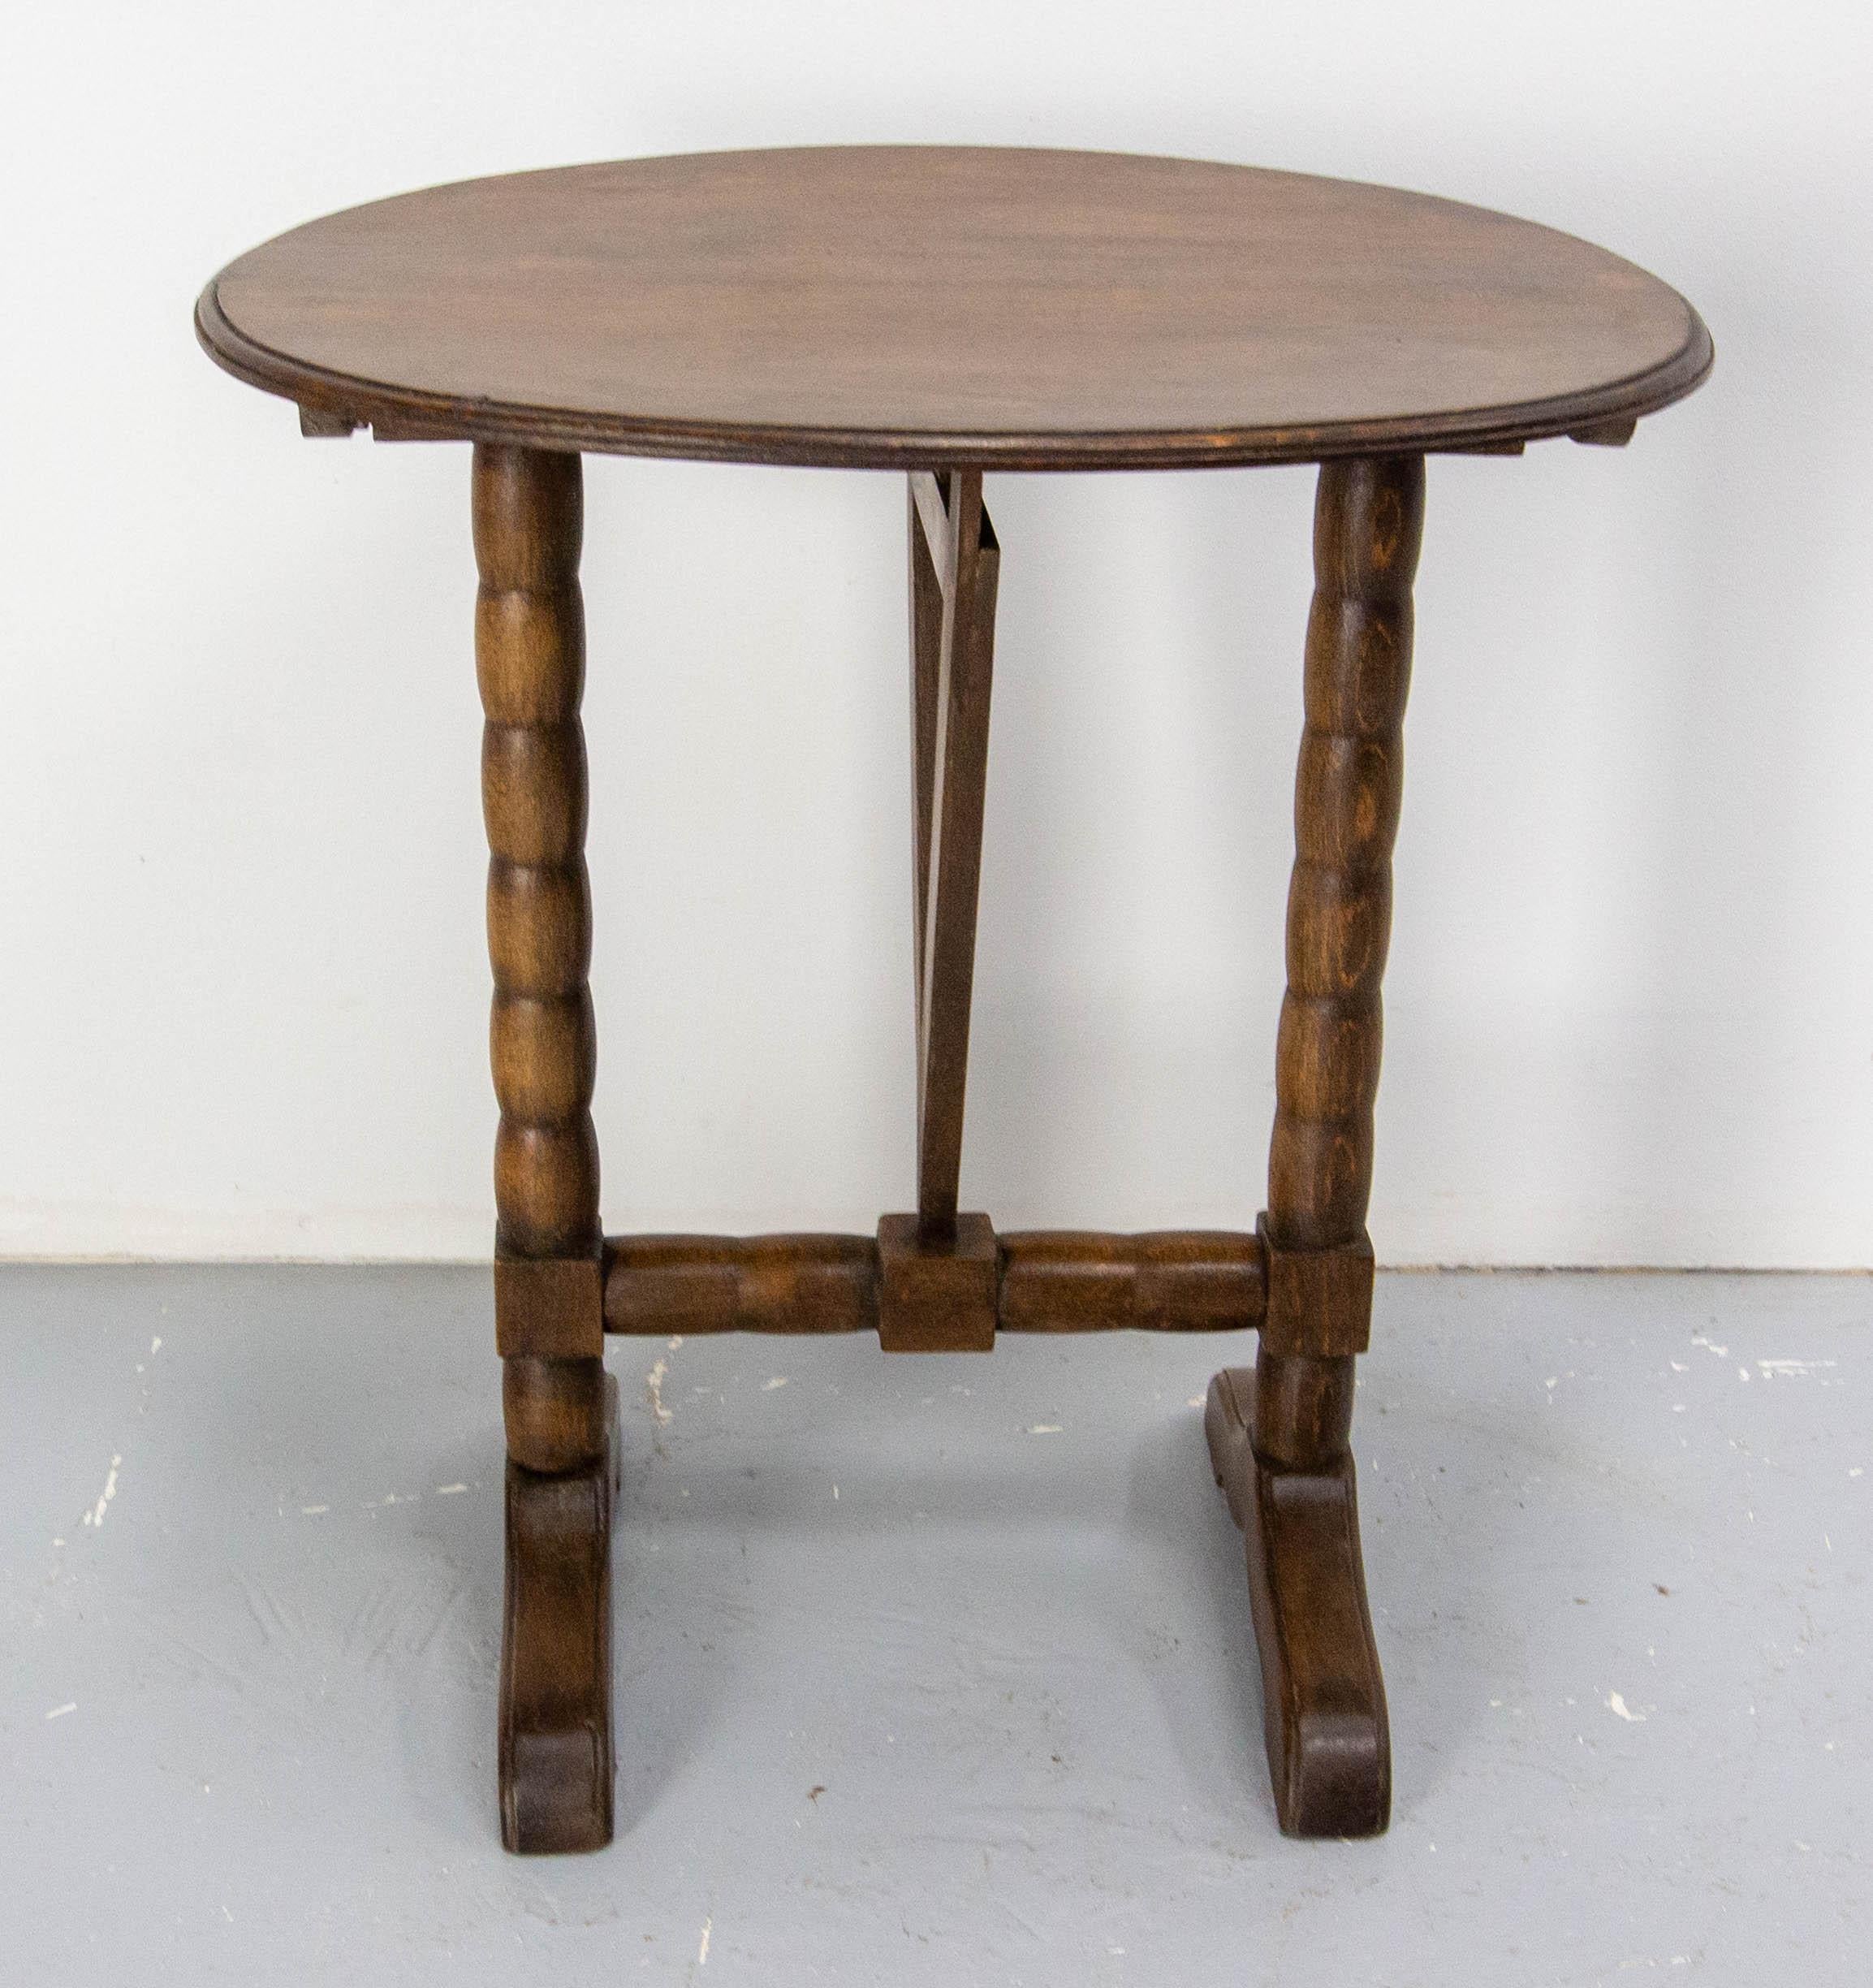 French Little Gueridon Foldable Side Table Called Winemaker's Table 19th Century 1